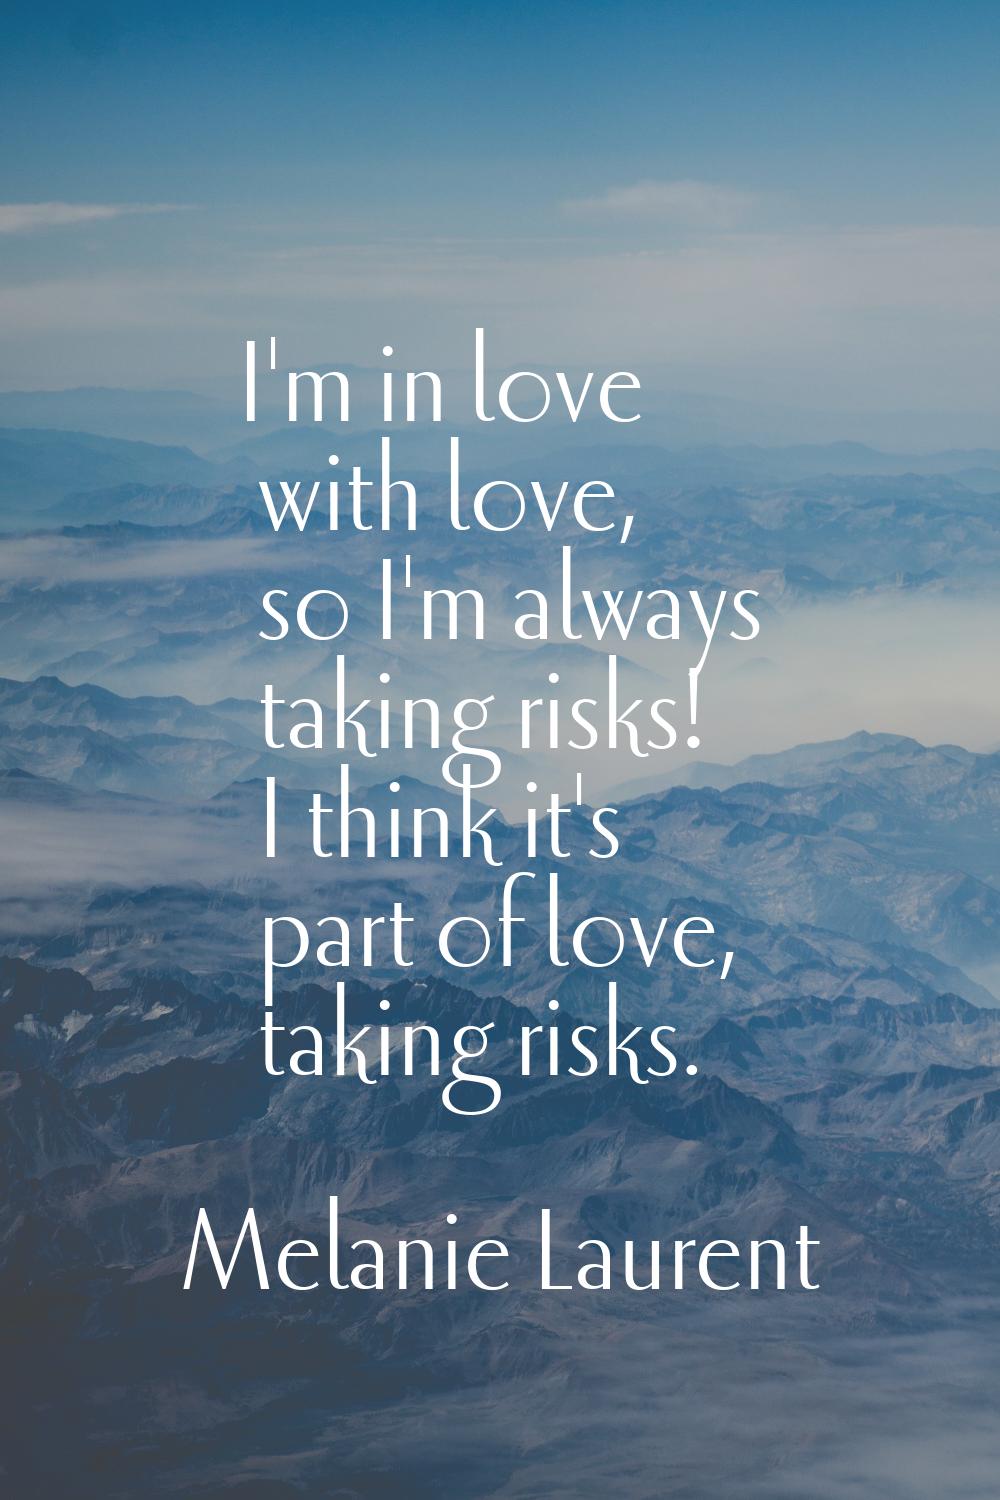 I'm in love with love, so I'm always taking risks! I think it's part of love, taking risks.